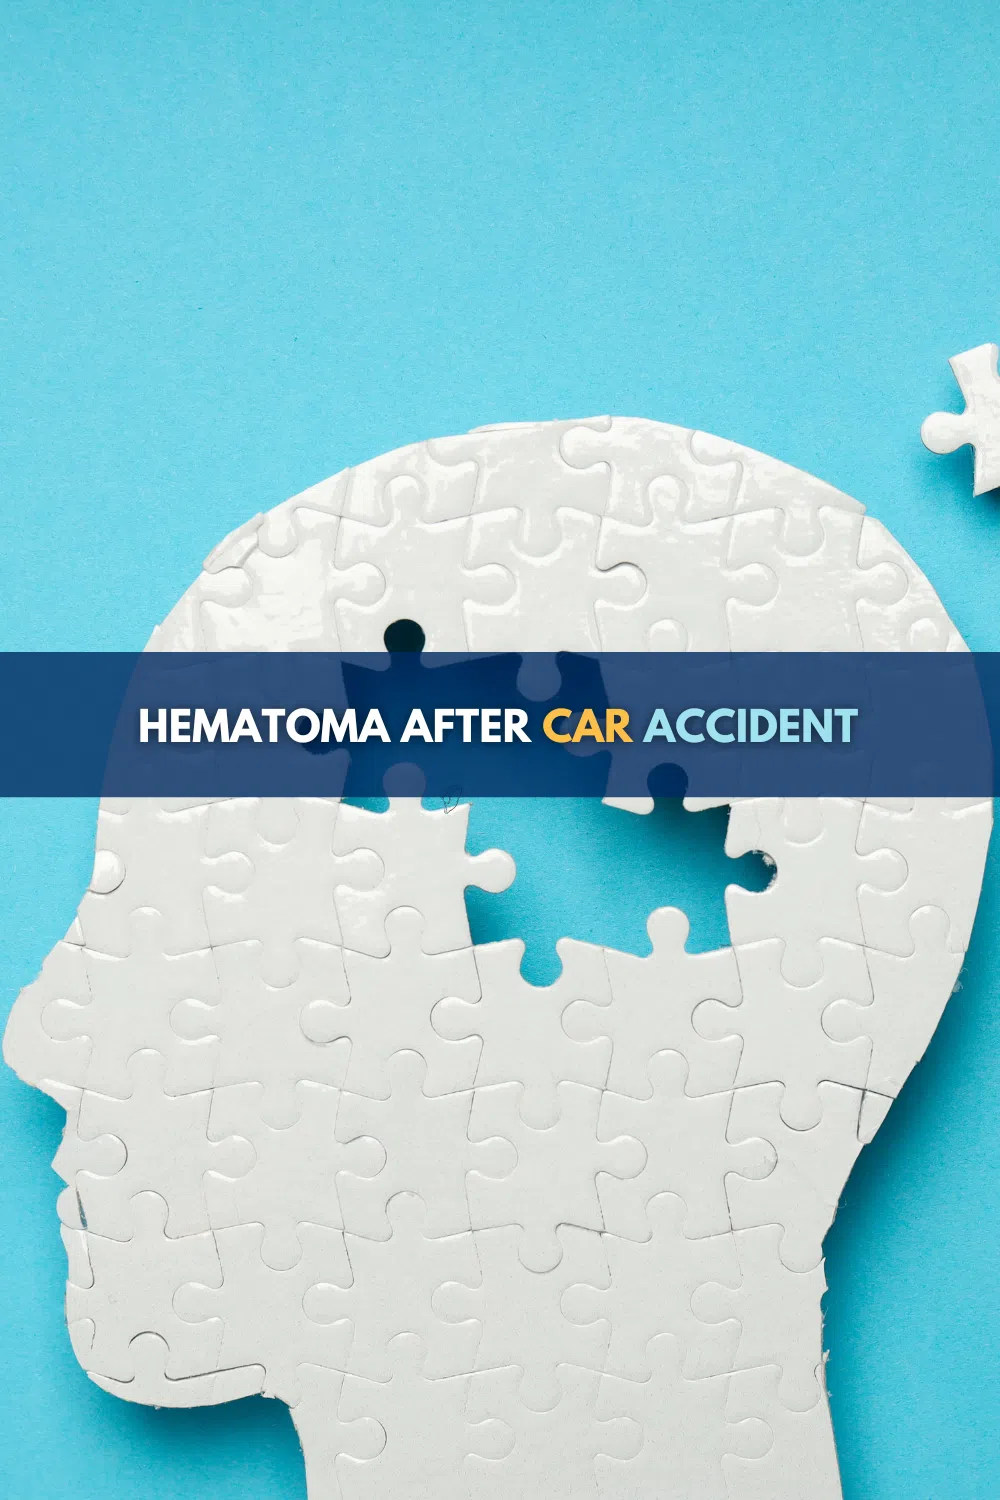 Hematoma After Car Accident: Should I Be Worried?